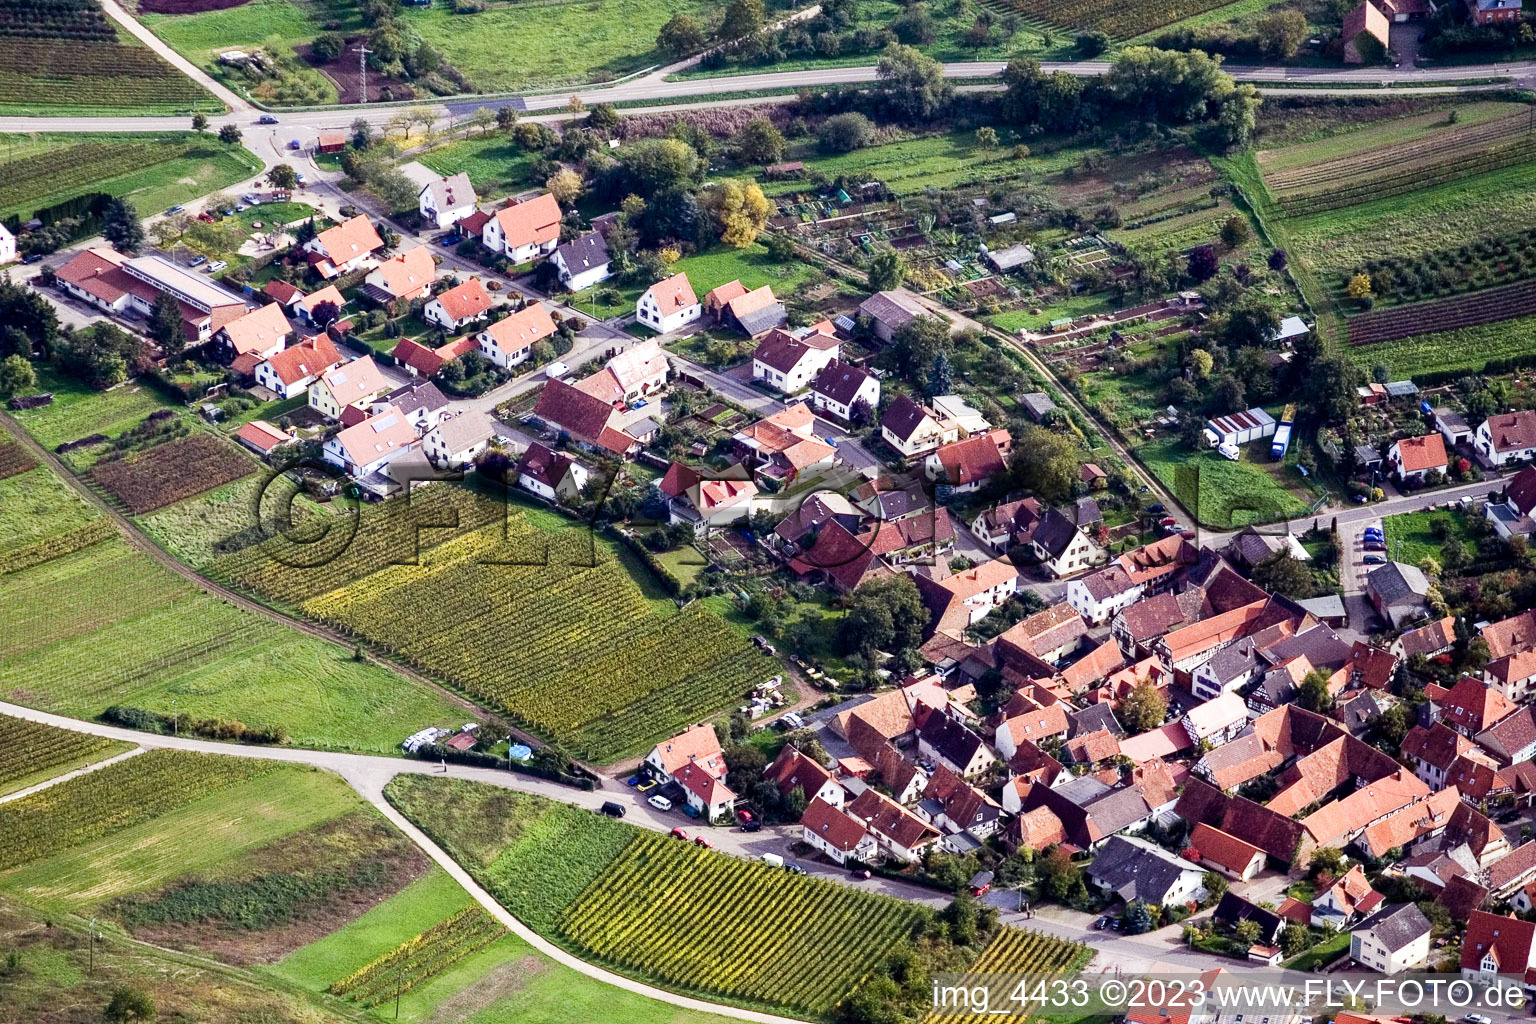 Aerial view of Track cells-Gleishohrbach in the district Gleishorbach in Gleiszellen-Gleishorbach in the state Rhineland-Palatinate, Germany